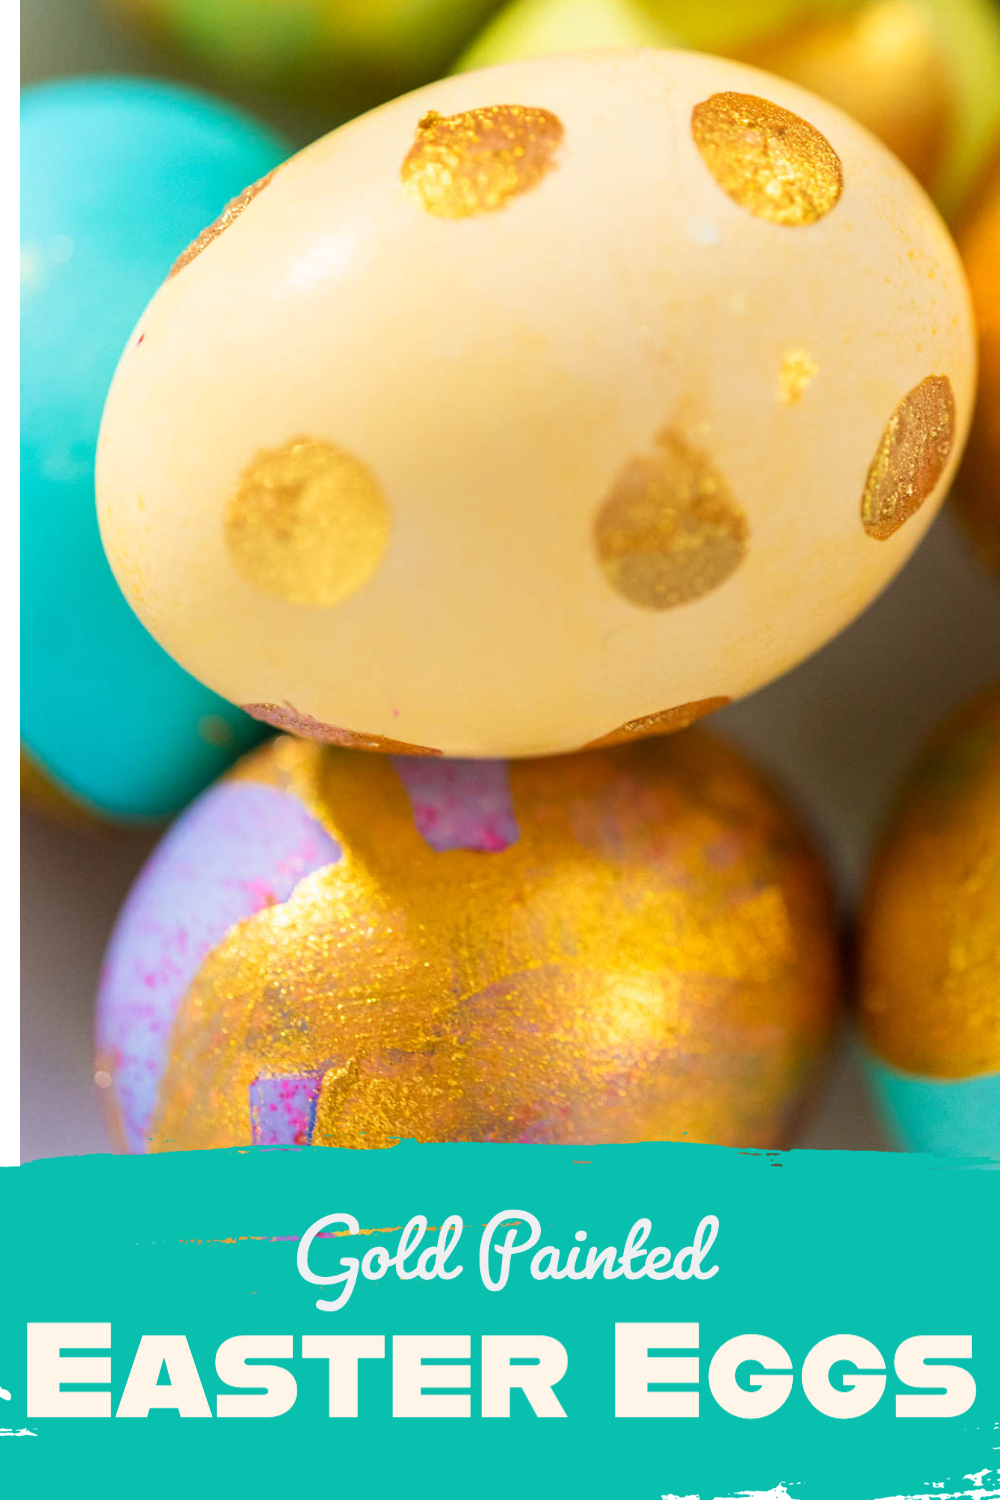 Gold Painted Easter Eggs